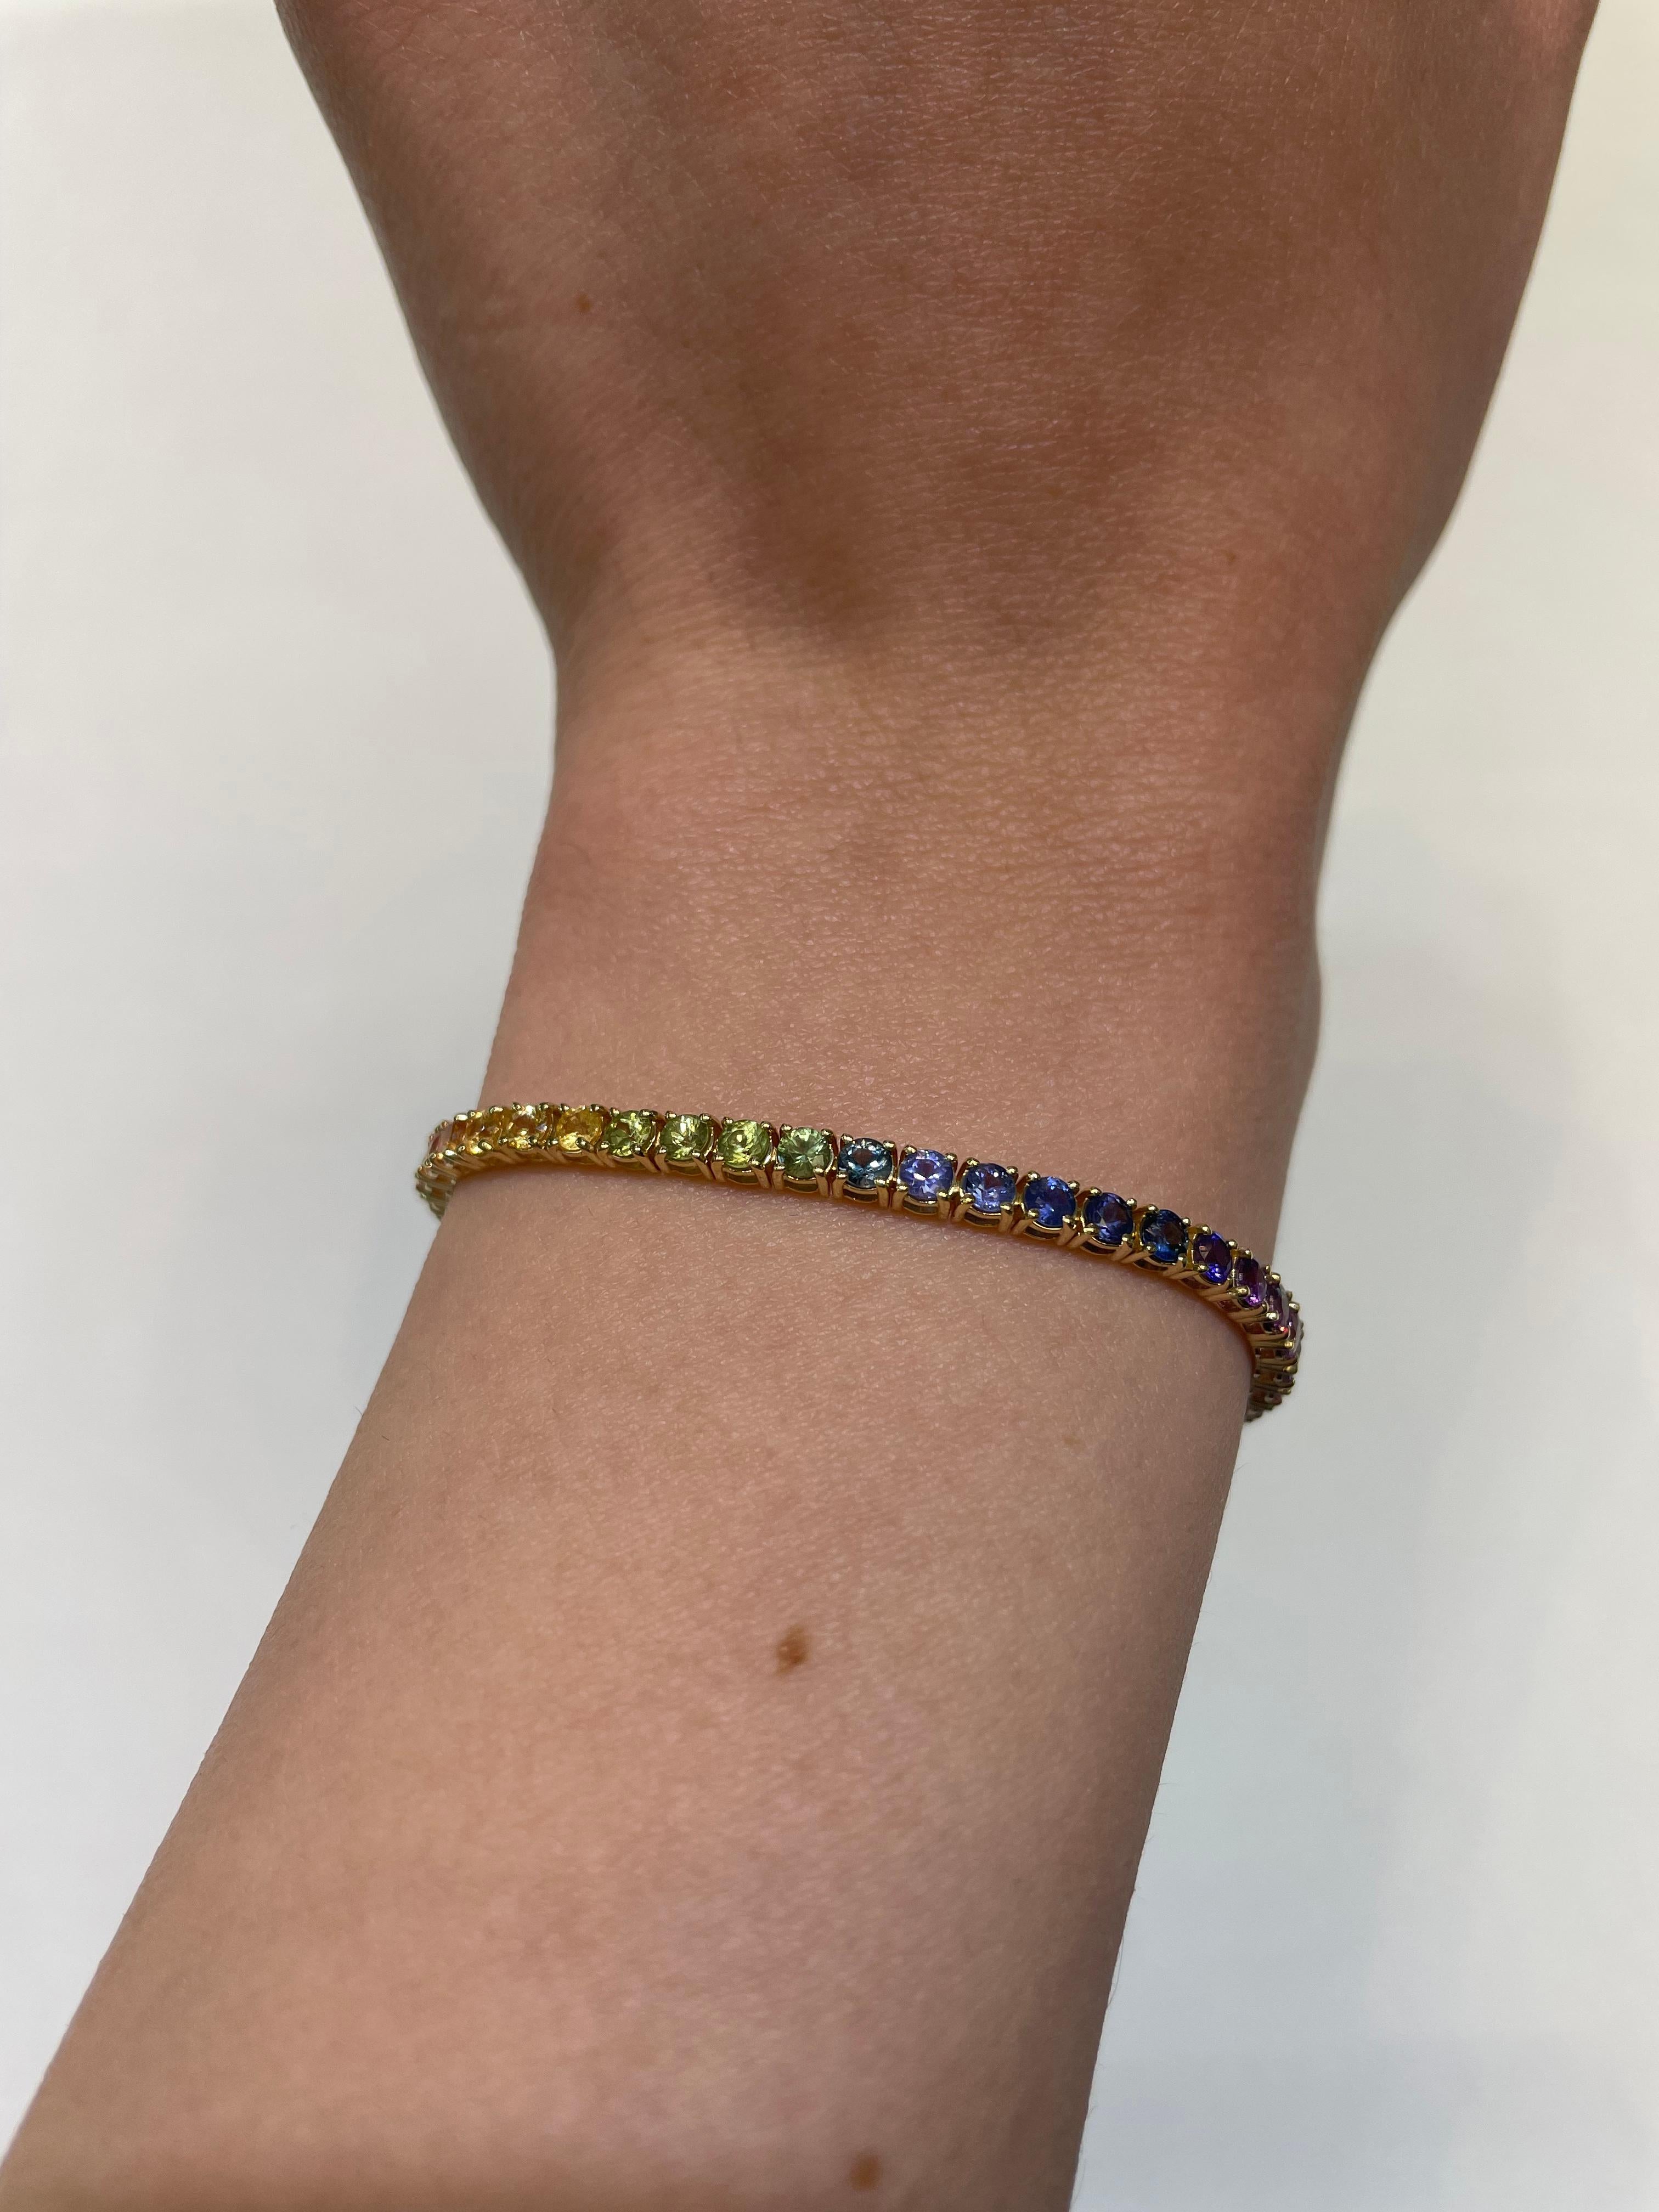 Exquisite and perfectly graduated rainbow multi color sapphire tennis bracelet, by Alexander Beverly Hills.
57 round sapphires, 5.65 carats total. Four prong set in 18k yellow gold, 8.40 grams, 7 inches.
Accommodated with an up to date appraisal by